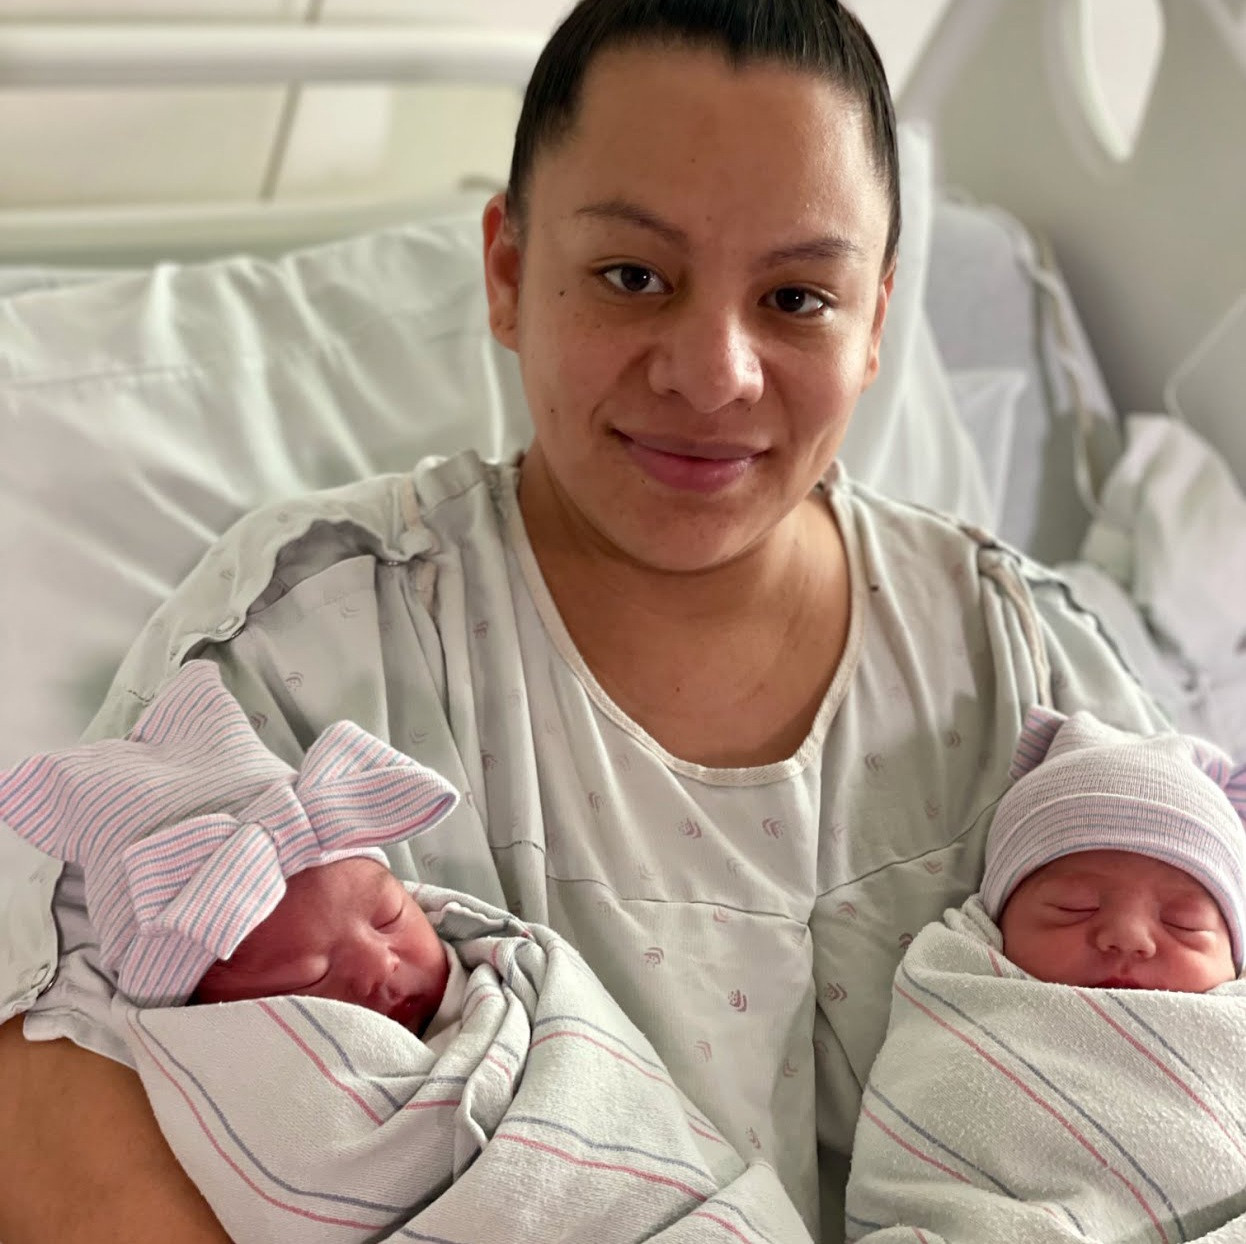 Mother gives birth to twins born in 2021 and 2022